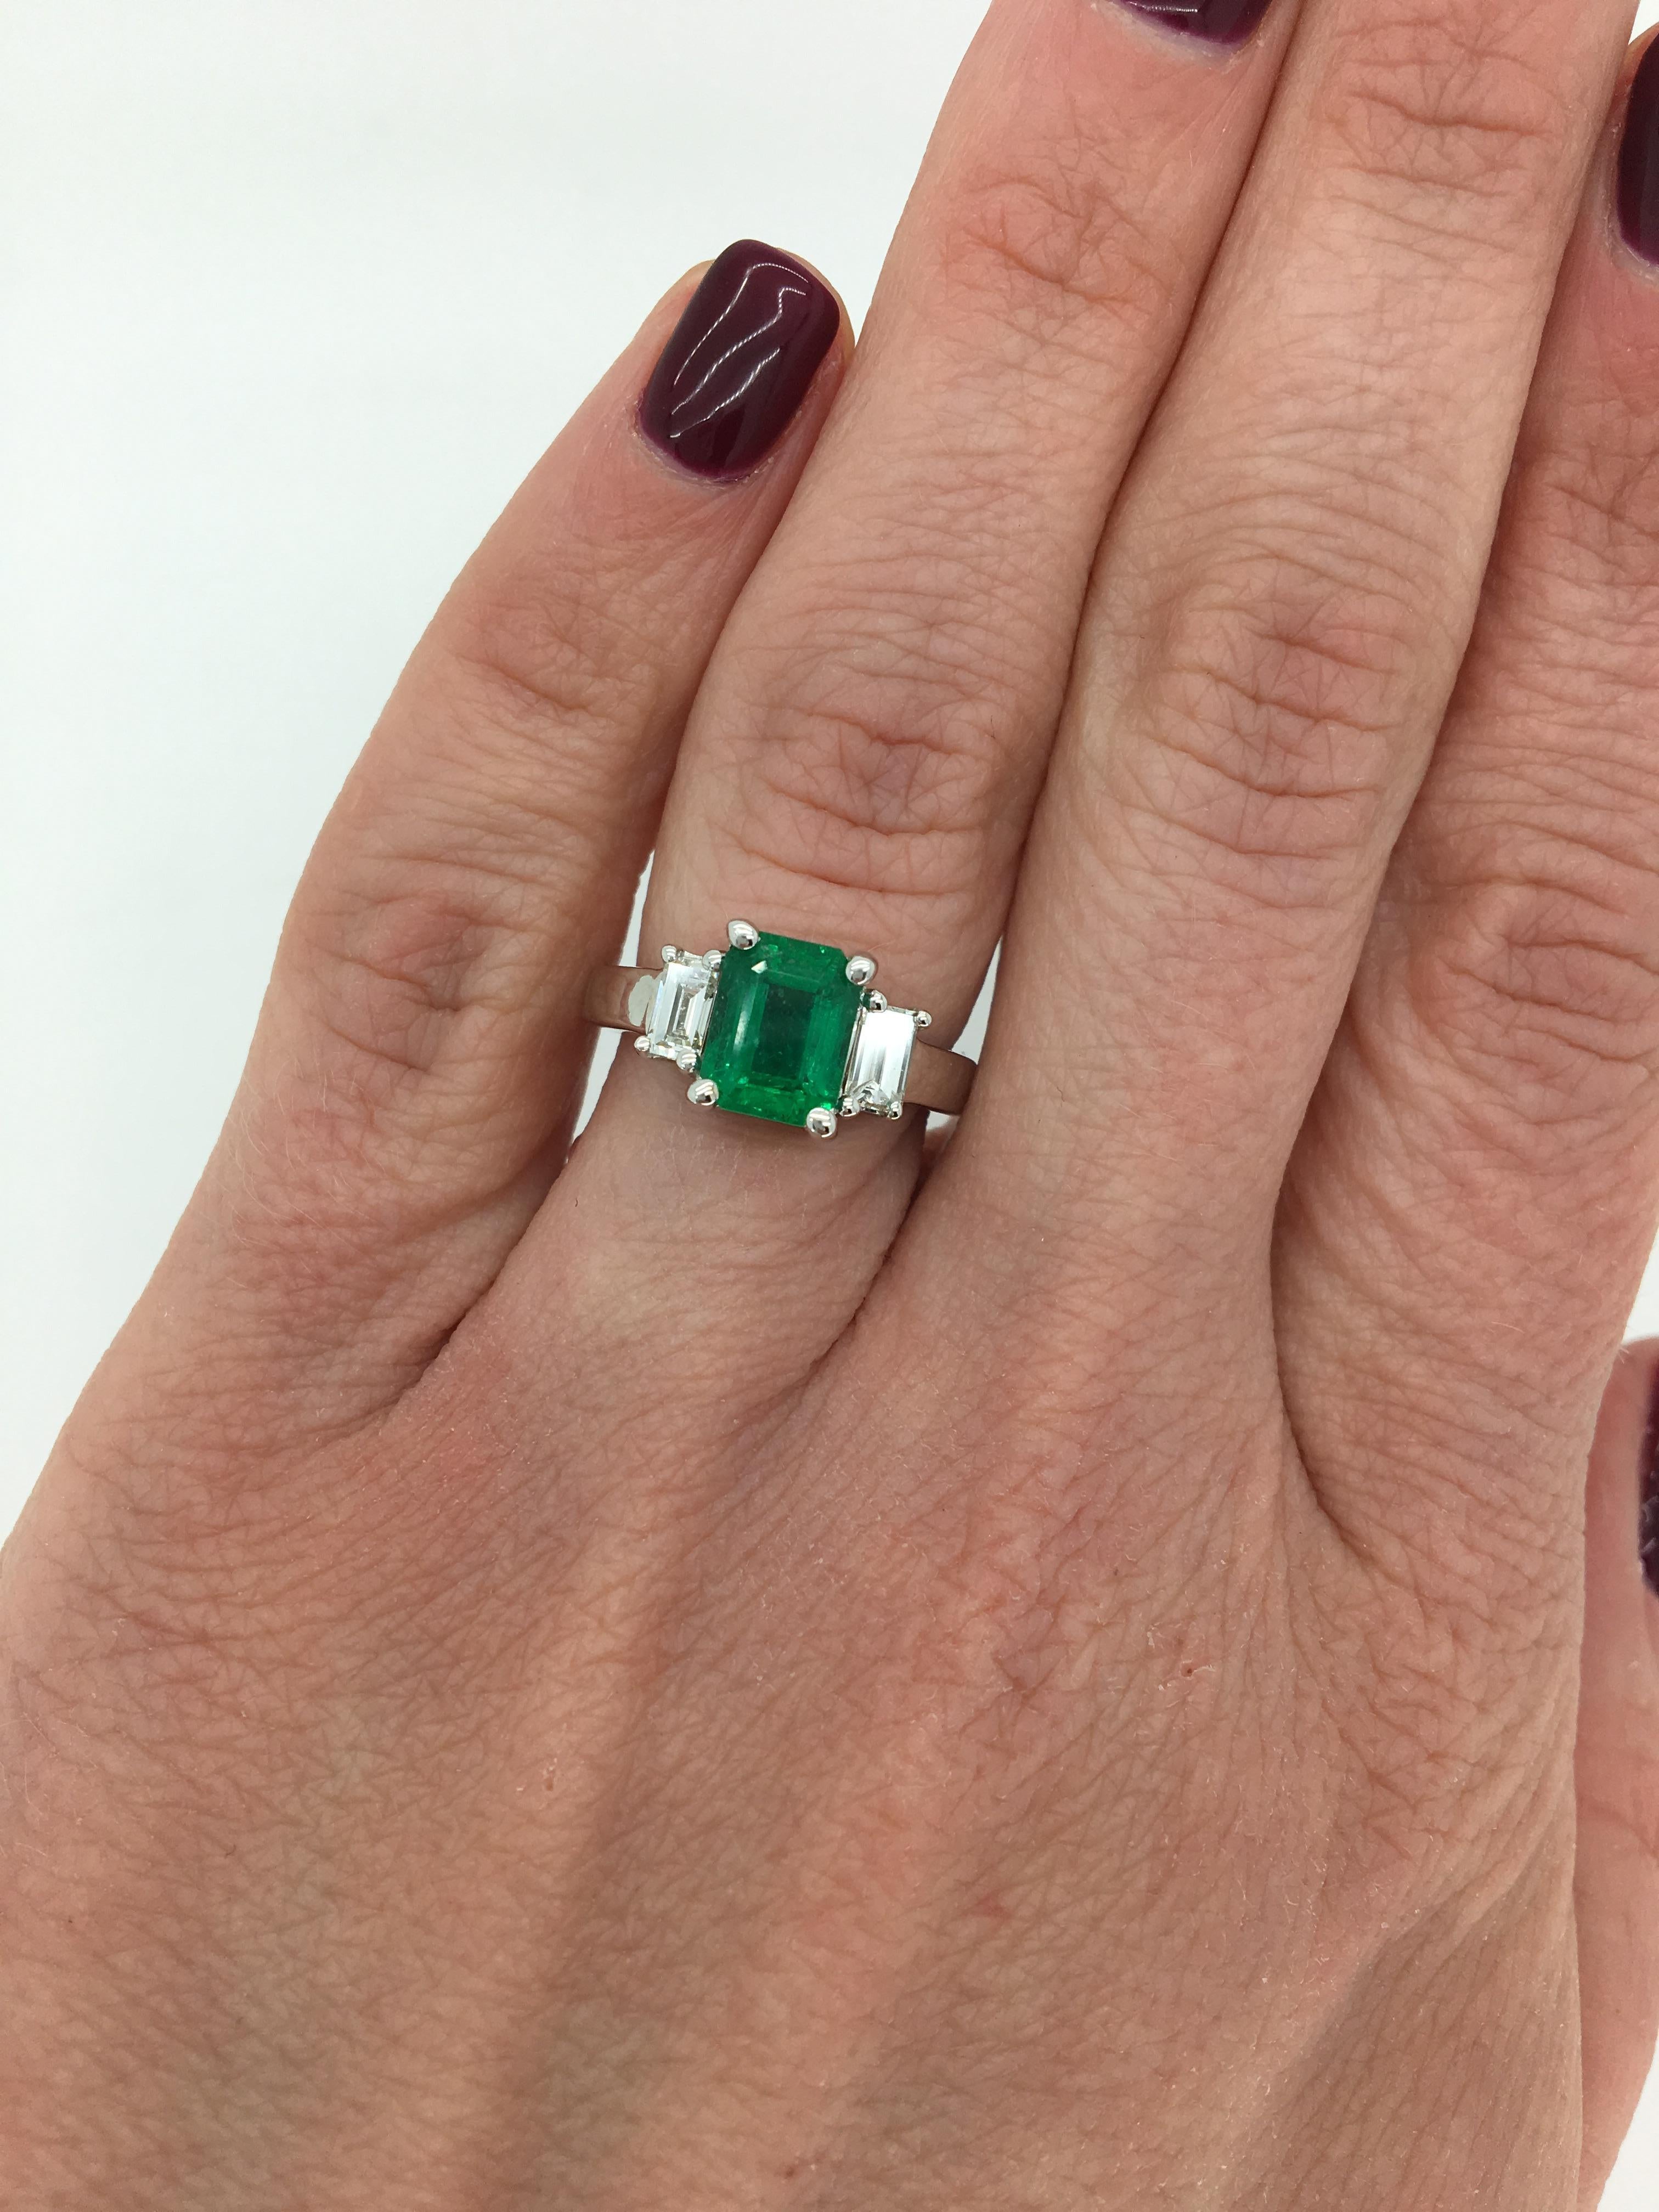 Classic three stone Emerald ring with flanking Emerald Cut Diamonds crafted in 14K white gold. 

Gemstone: Emerald & Diamond
Gemstone Carat Weight: Approximately 1.65CT Emerald
Diamond Carat Weight:  Approximately .39CTW
Diamond Cut: Emerald